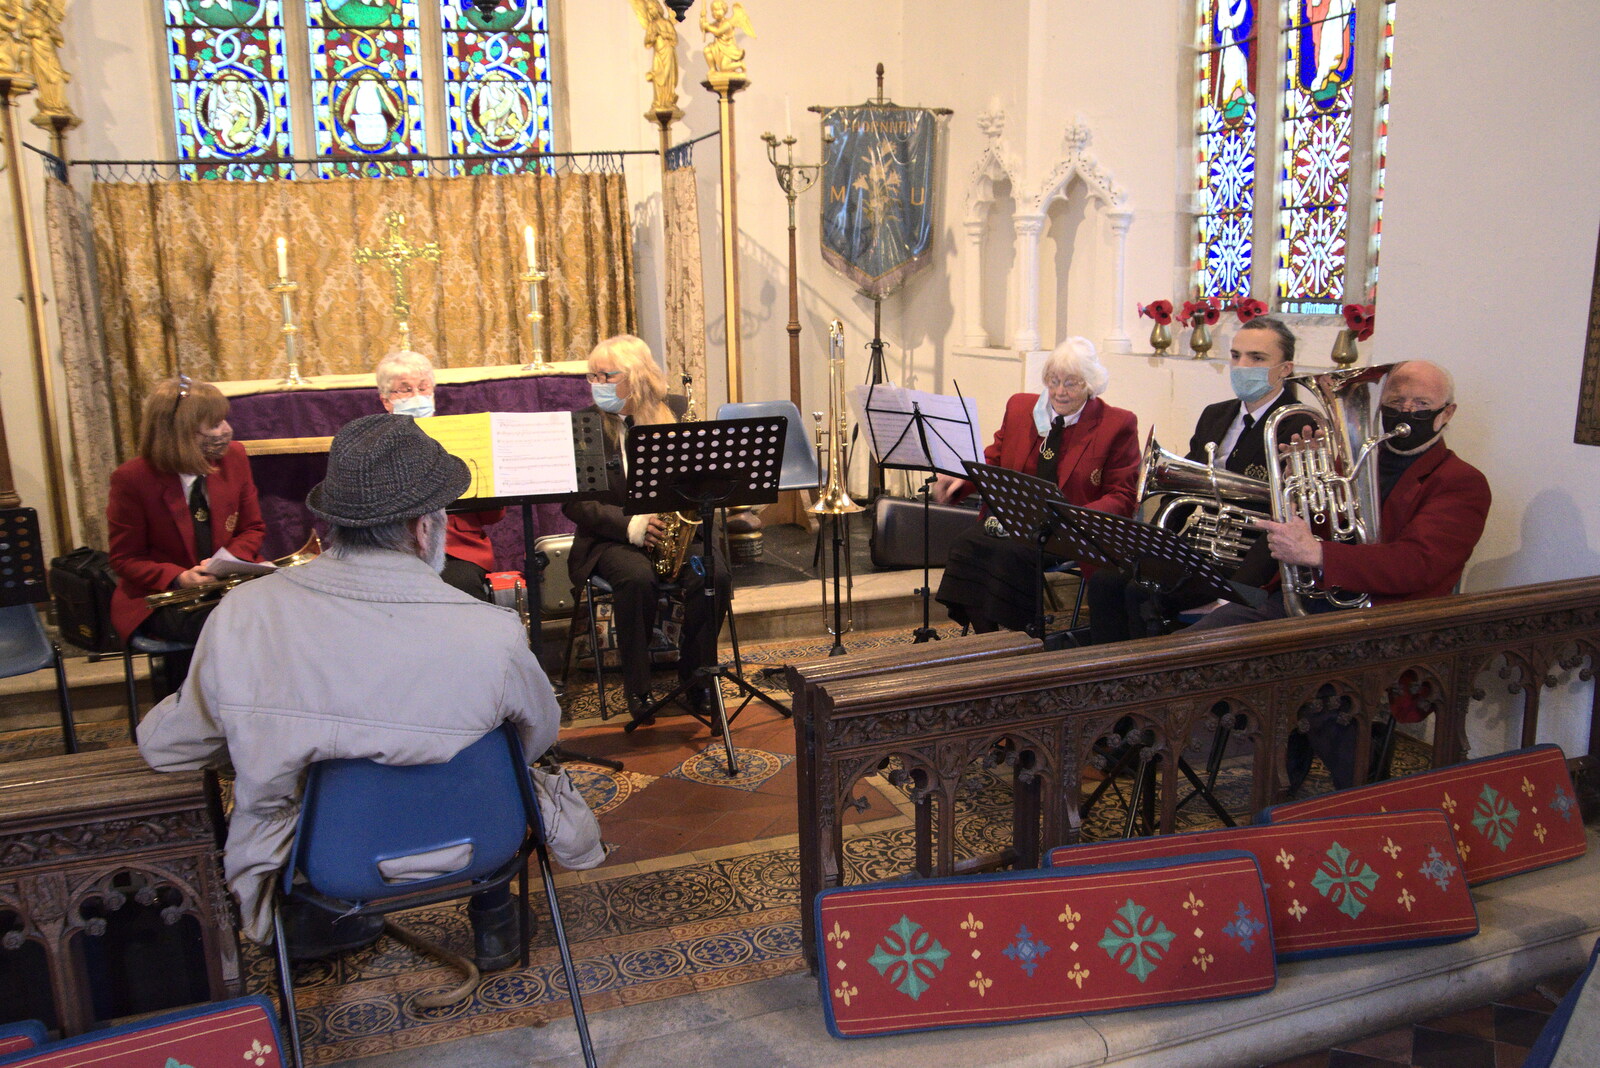 The horn section waits from GSB Carols and Beer With the Lads, Thornham and Thorndon, Suffolk  - 18th December 2021